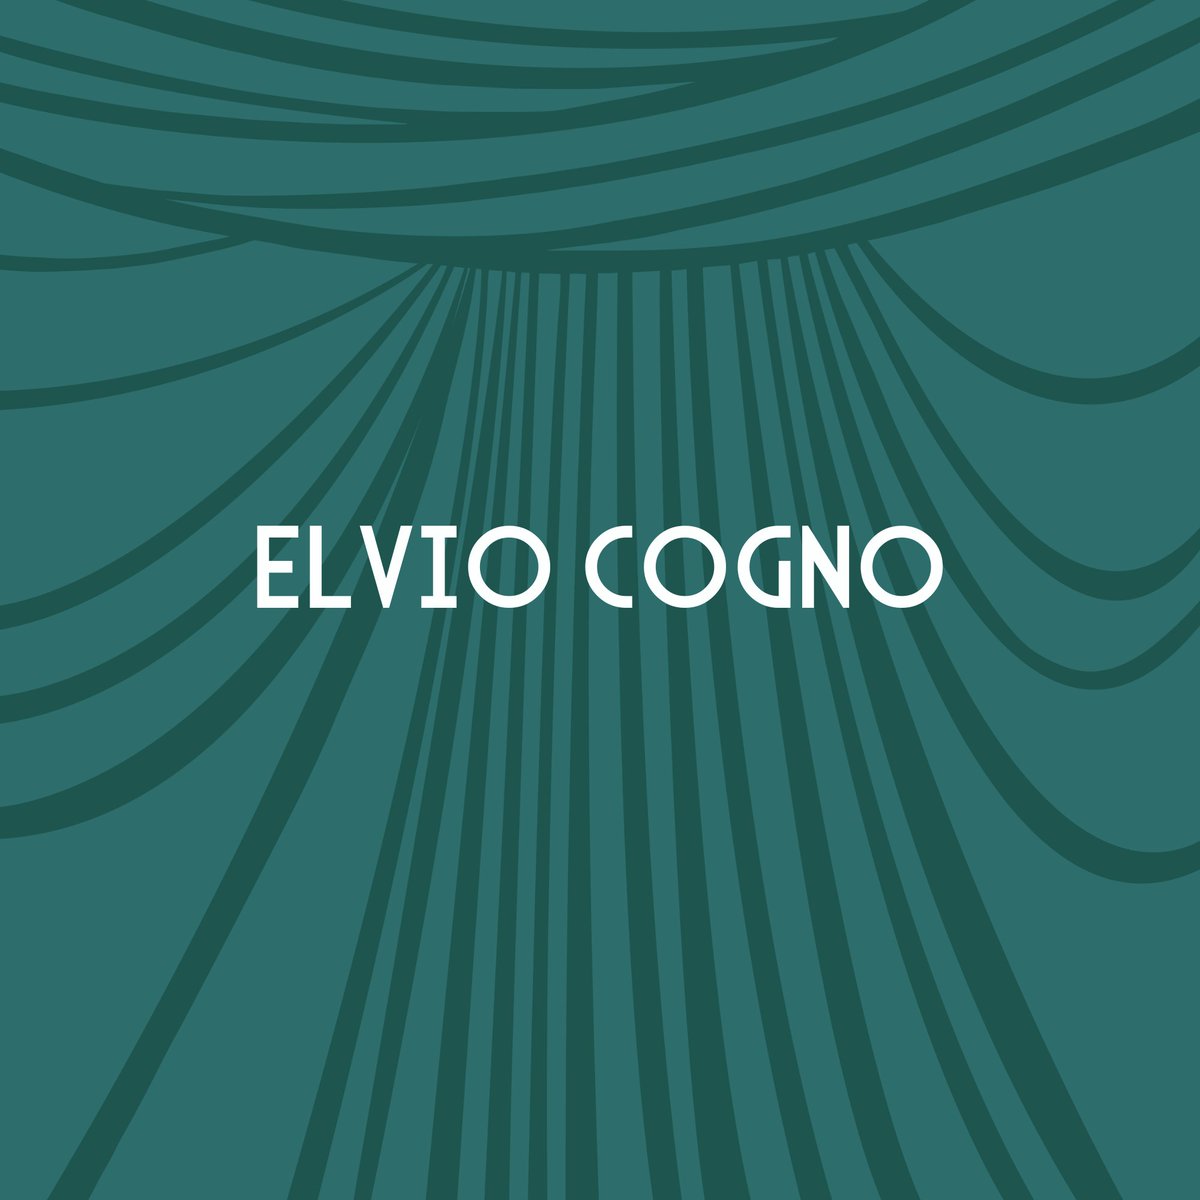 @elviocogno has been selected by Wine Spectator as one of the best Italian wineries for #OperaWine2024 #ItalianWinery #ItalianWine #VinoItaliano #WineSpectator #OperaWine #Vinitaly2024 #BestItalianWines